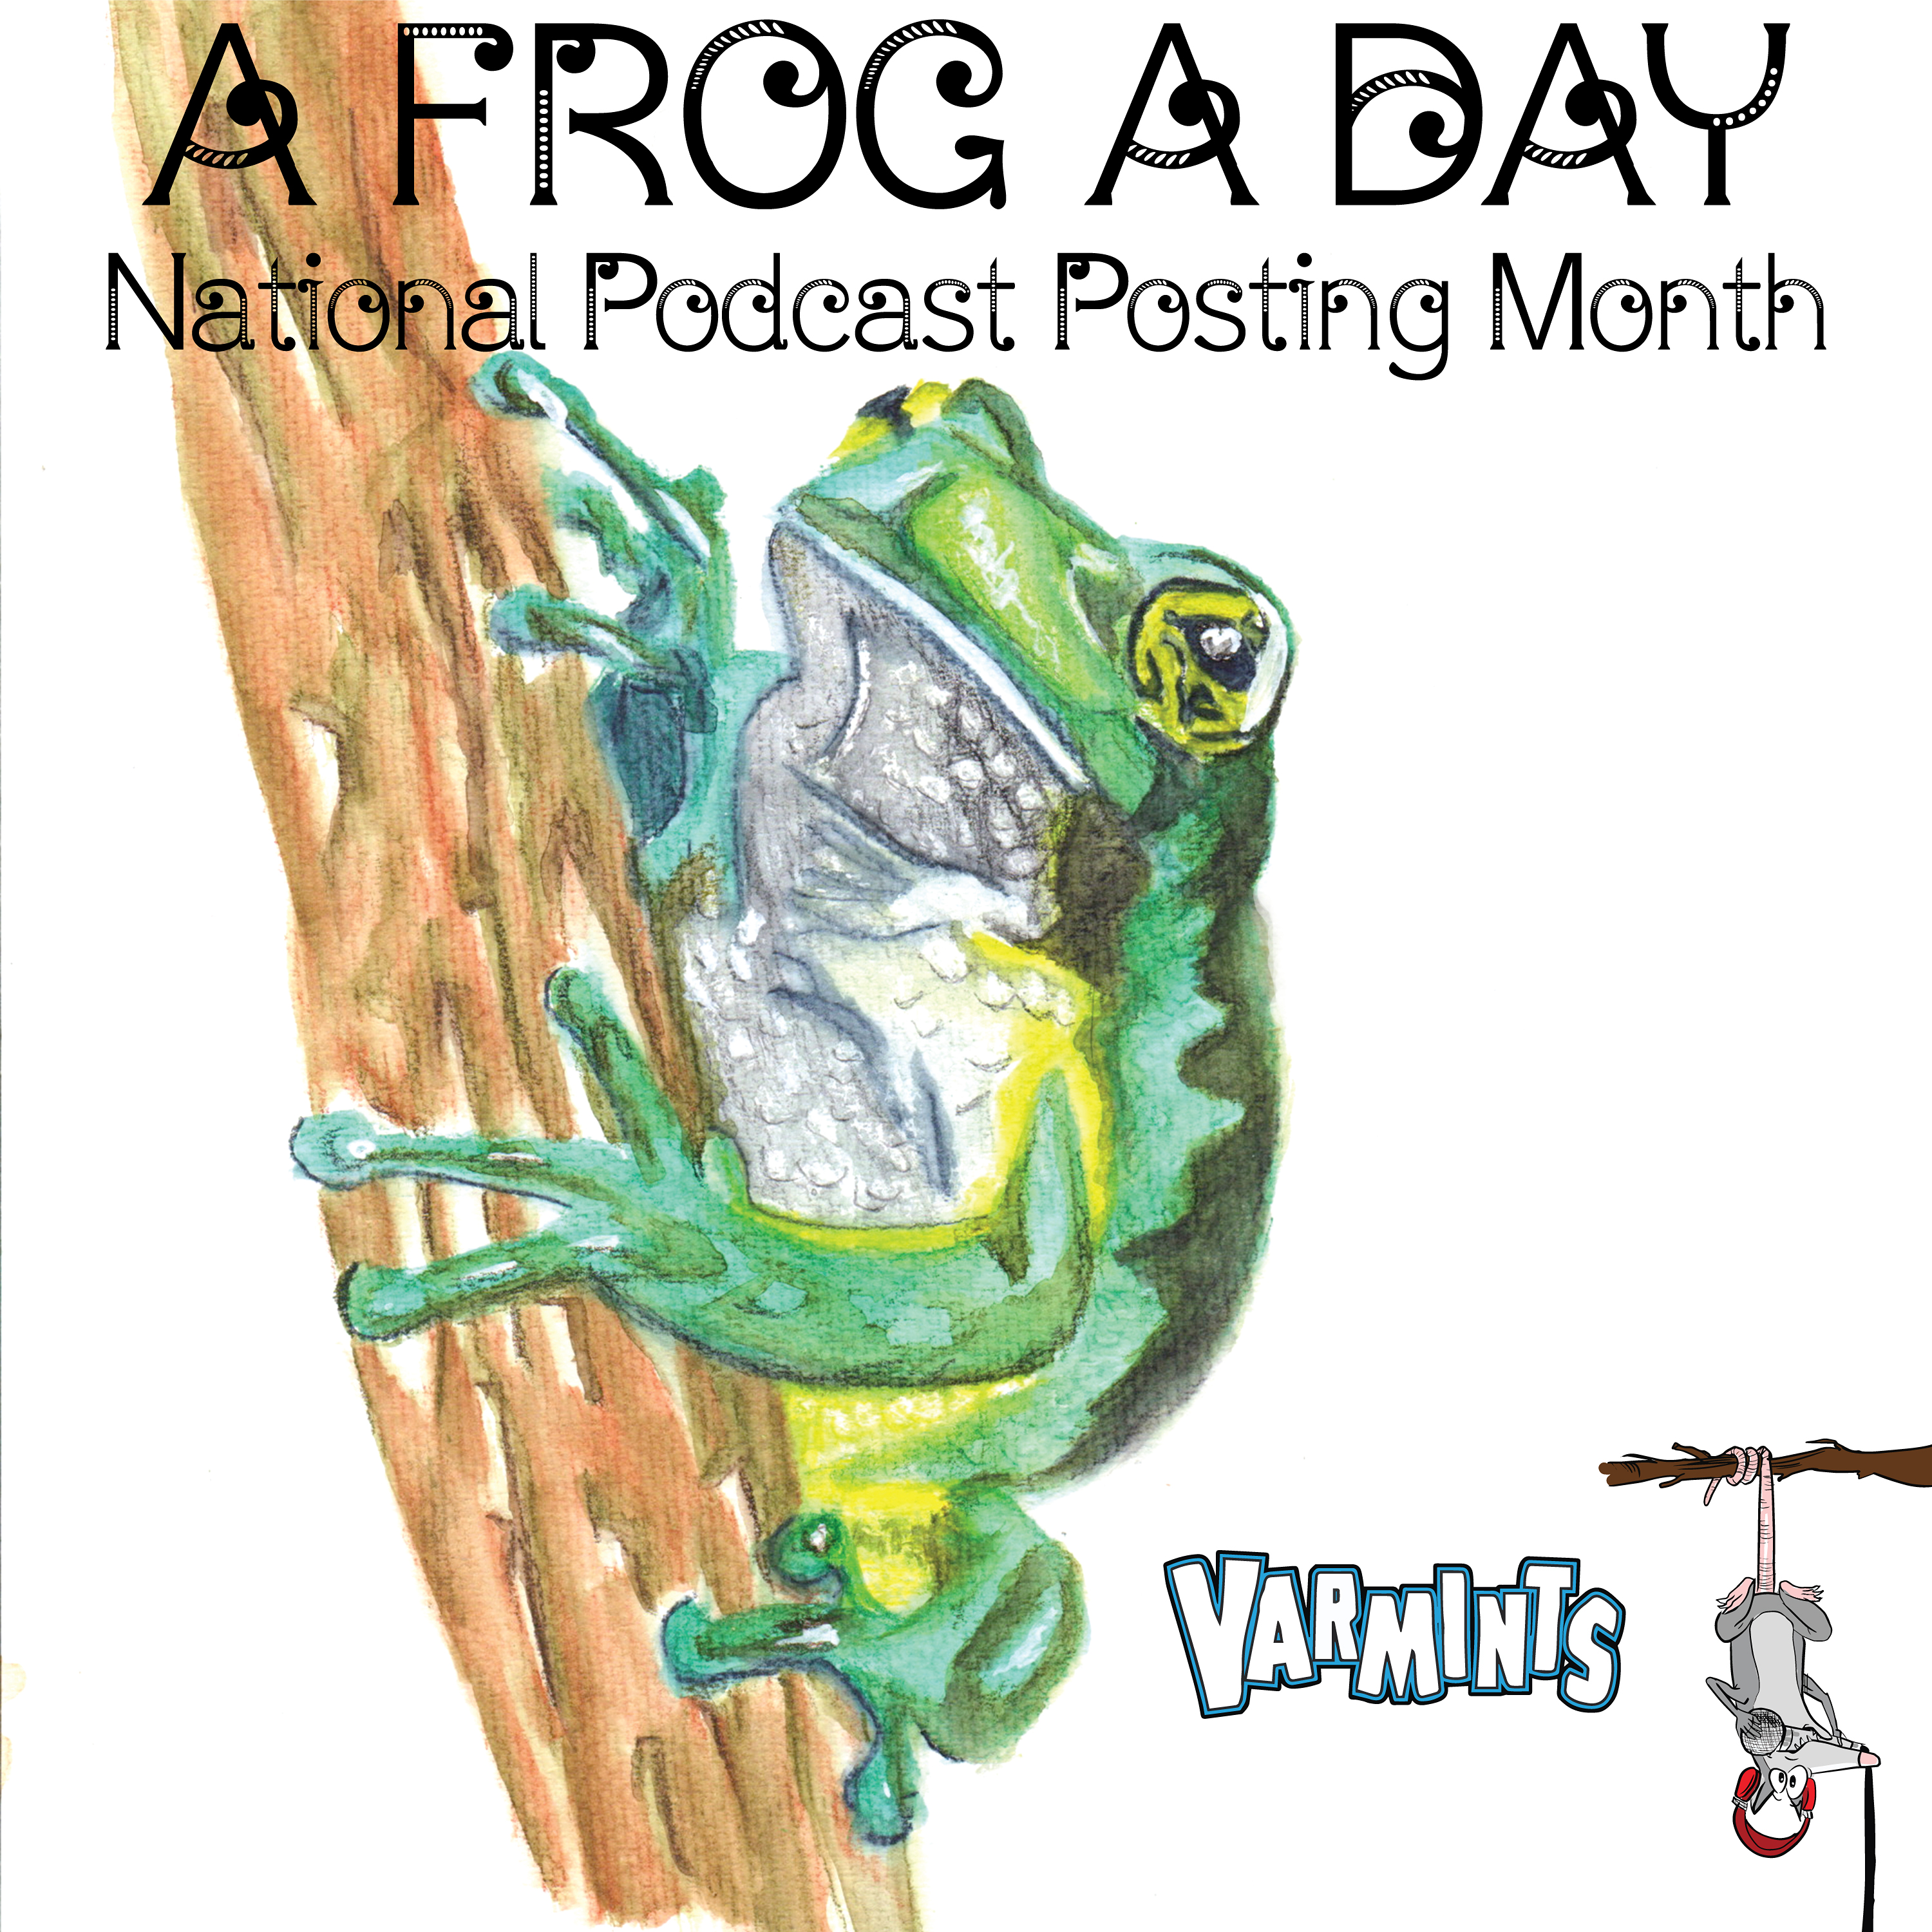 Frog Article Discussion with the Cast!